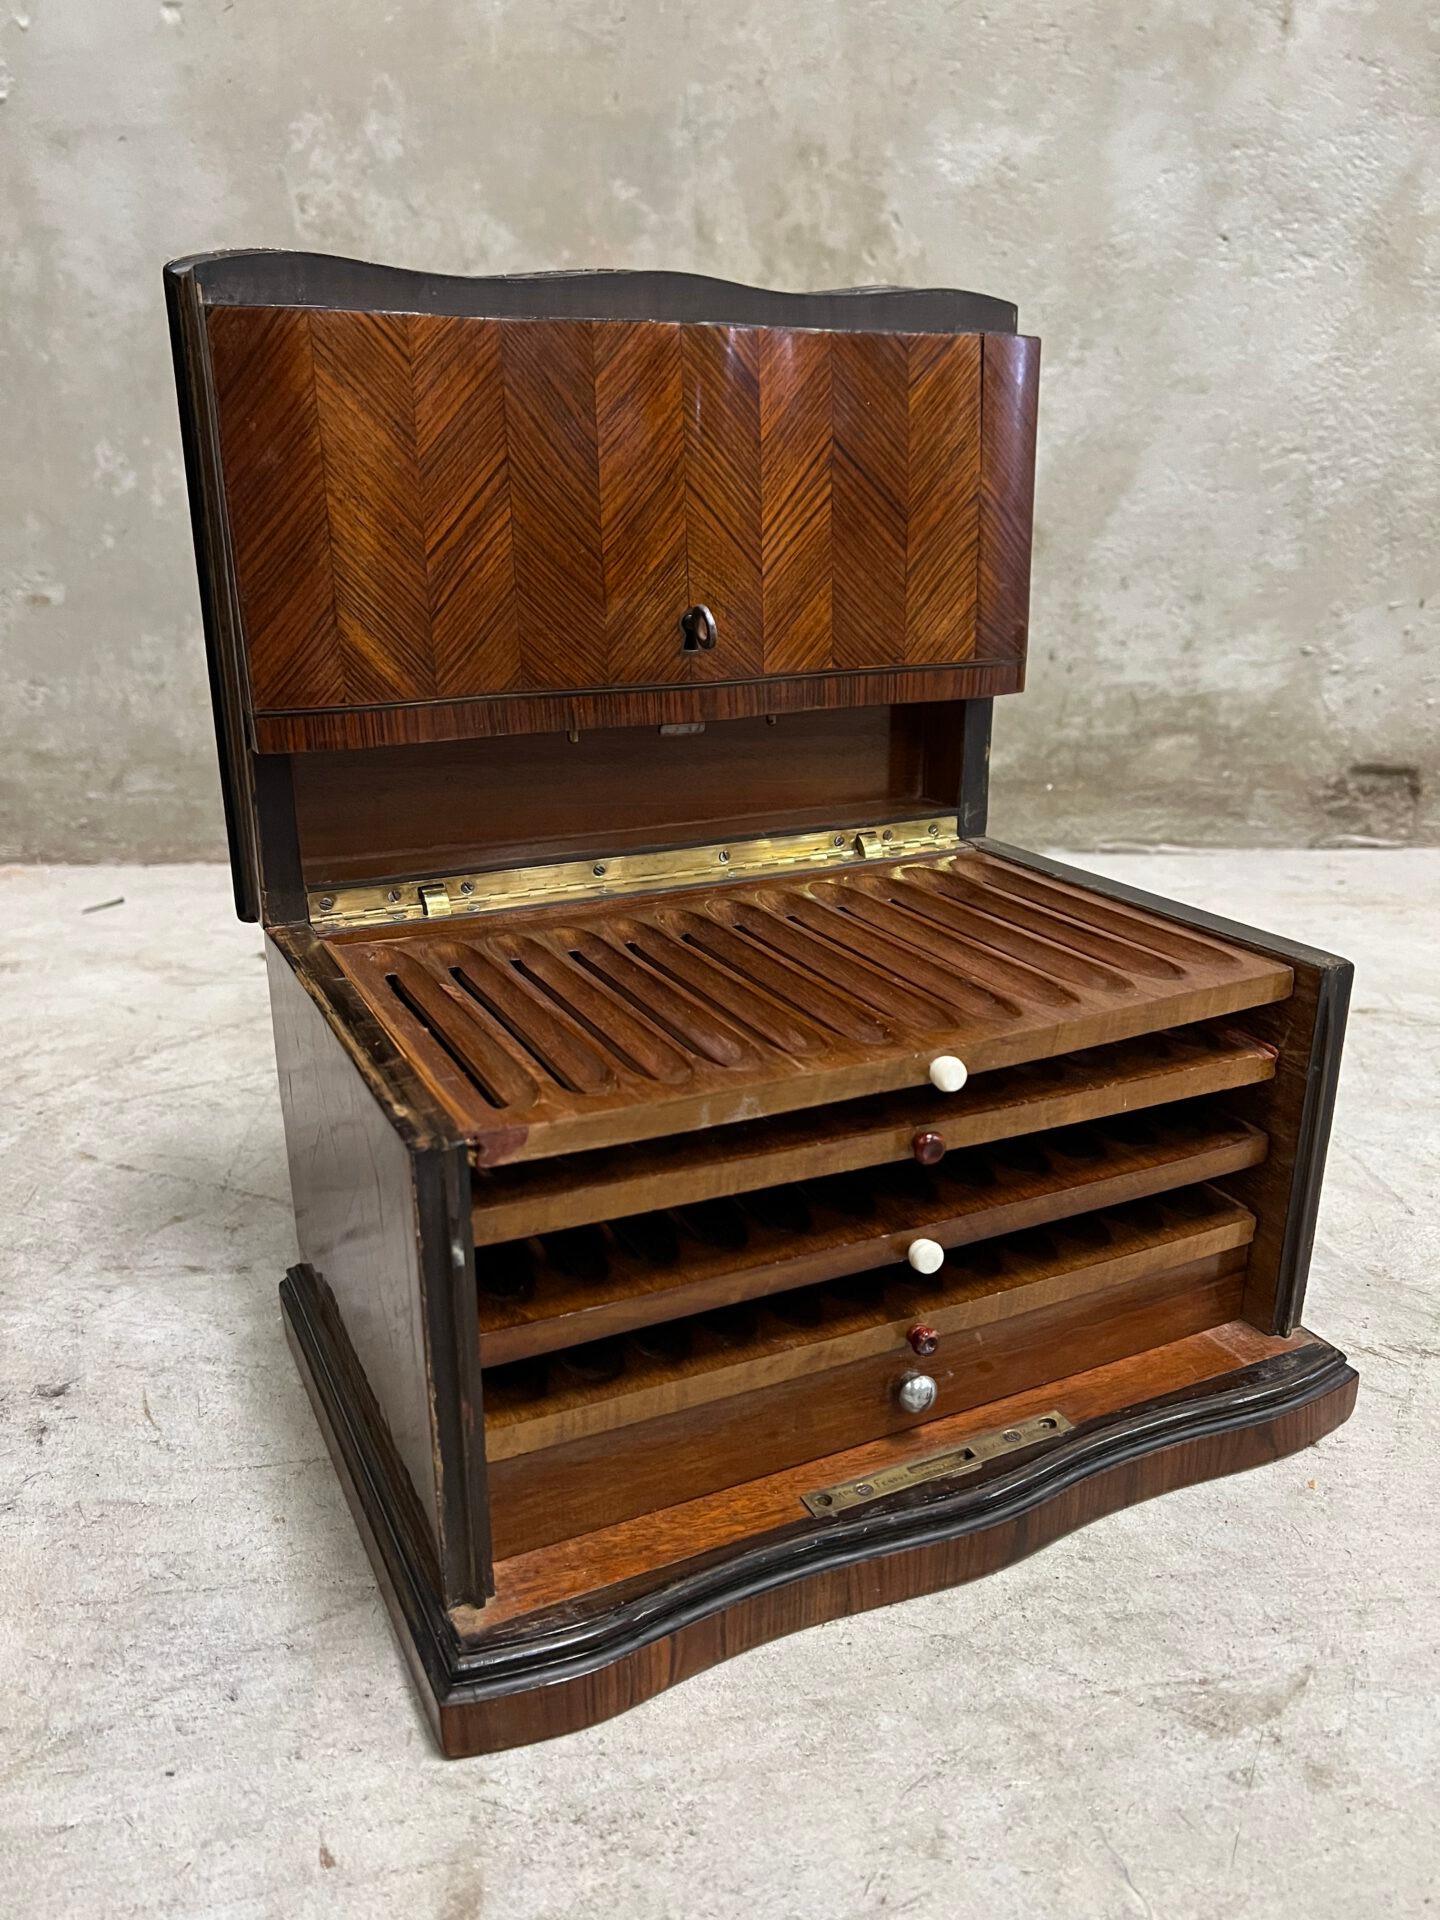 For the cigar smoker! This French Napoleon III cigar box / cabinet is an addition to your office or home. Dating from the period around 1850-1870 and is inlaid with brass, mother-of-pearl on the top. Entirely patterned with wood. Super chic and